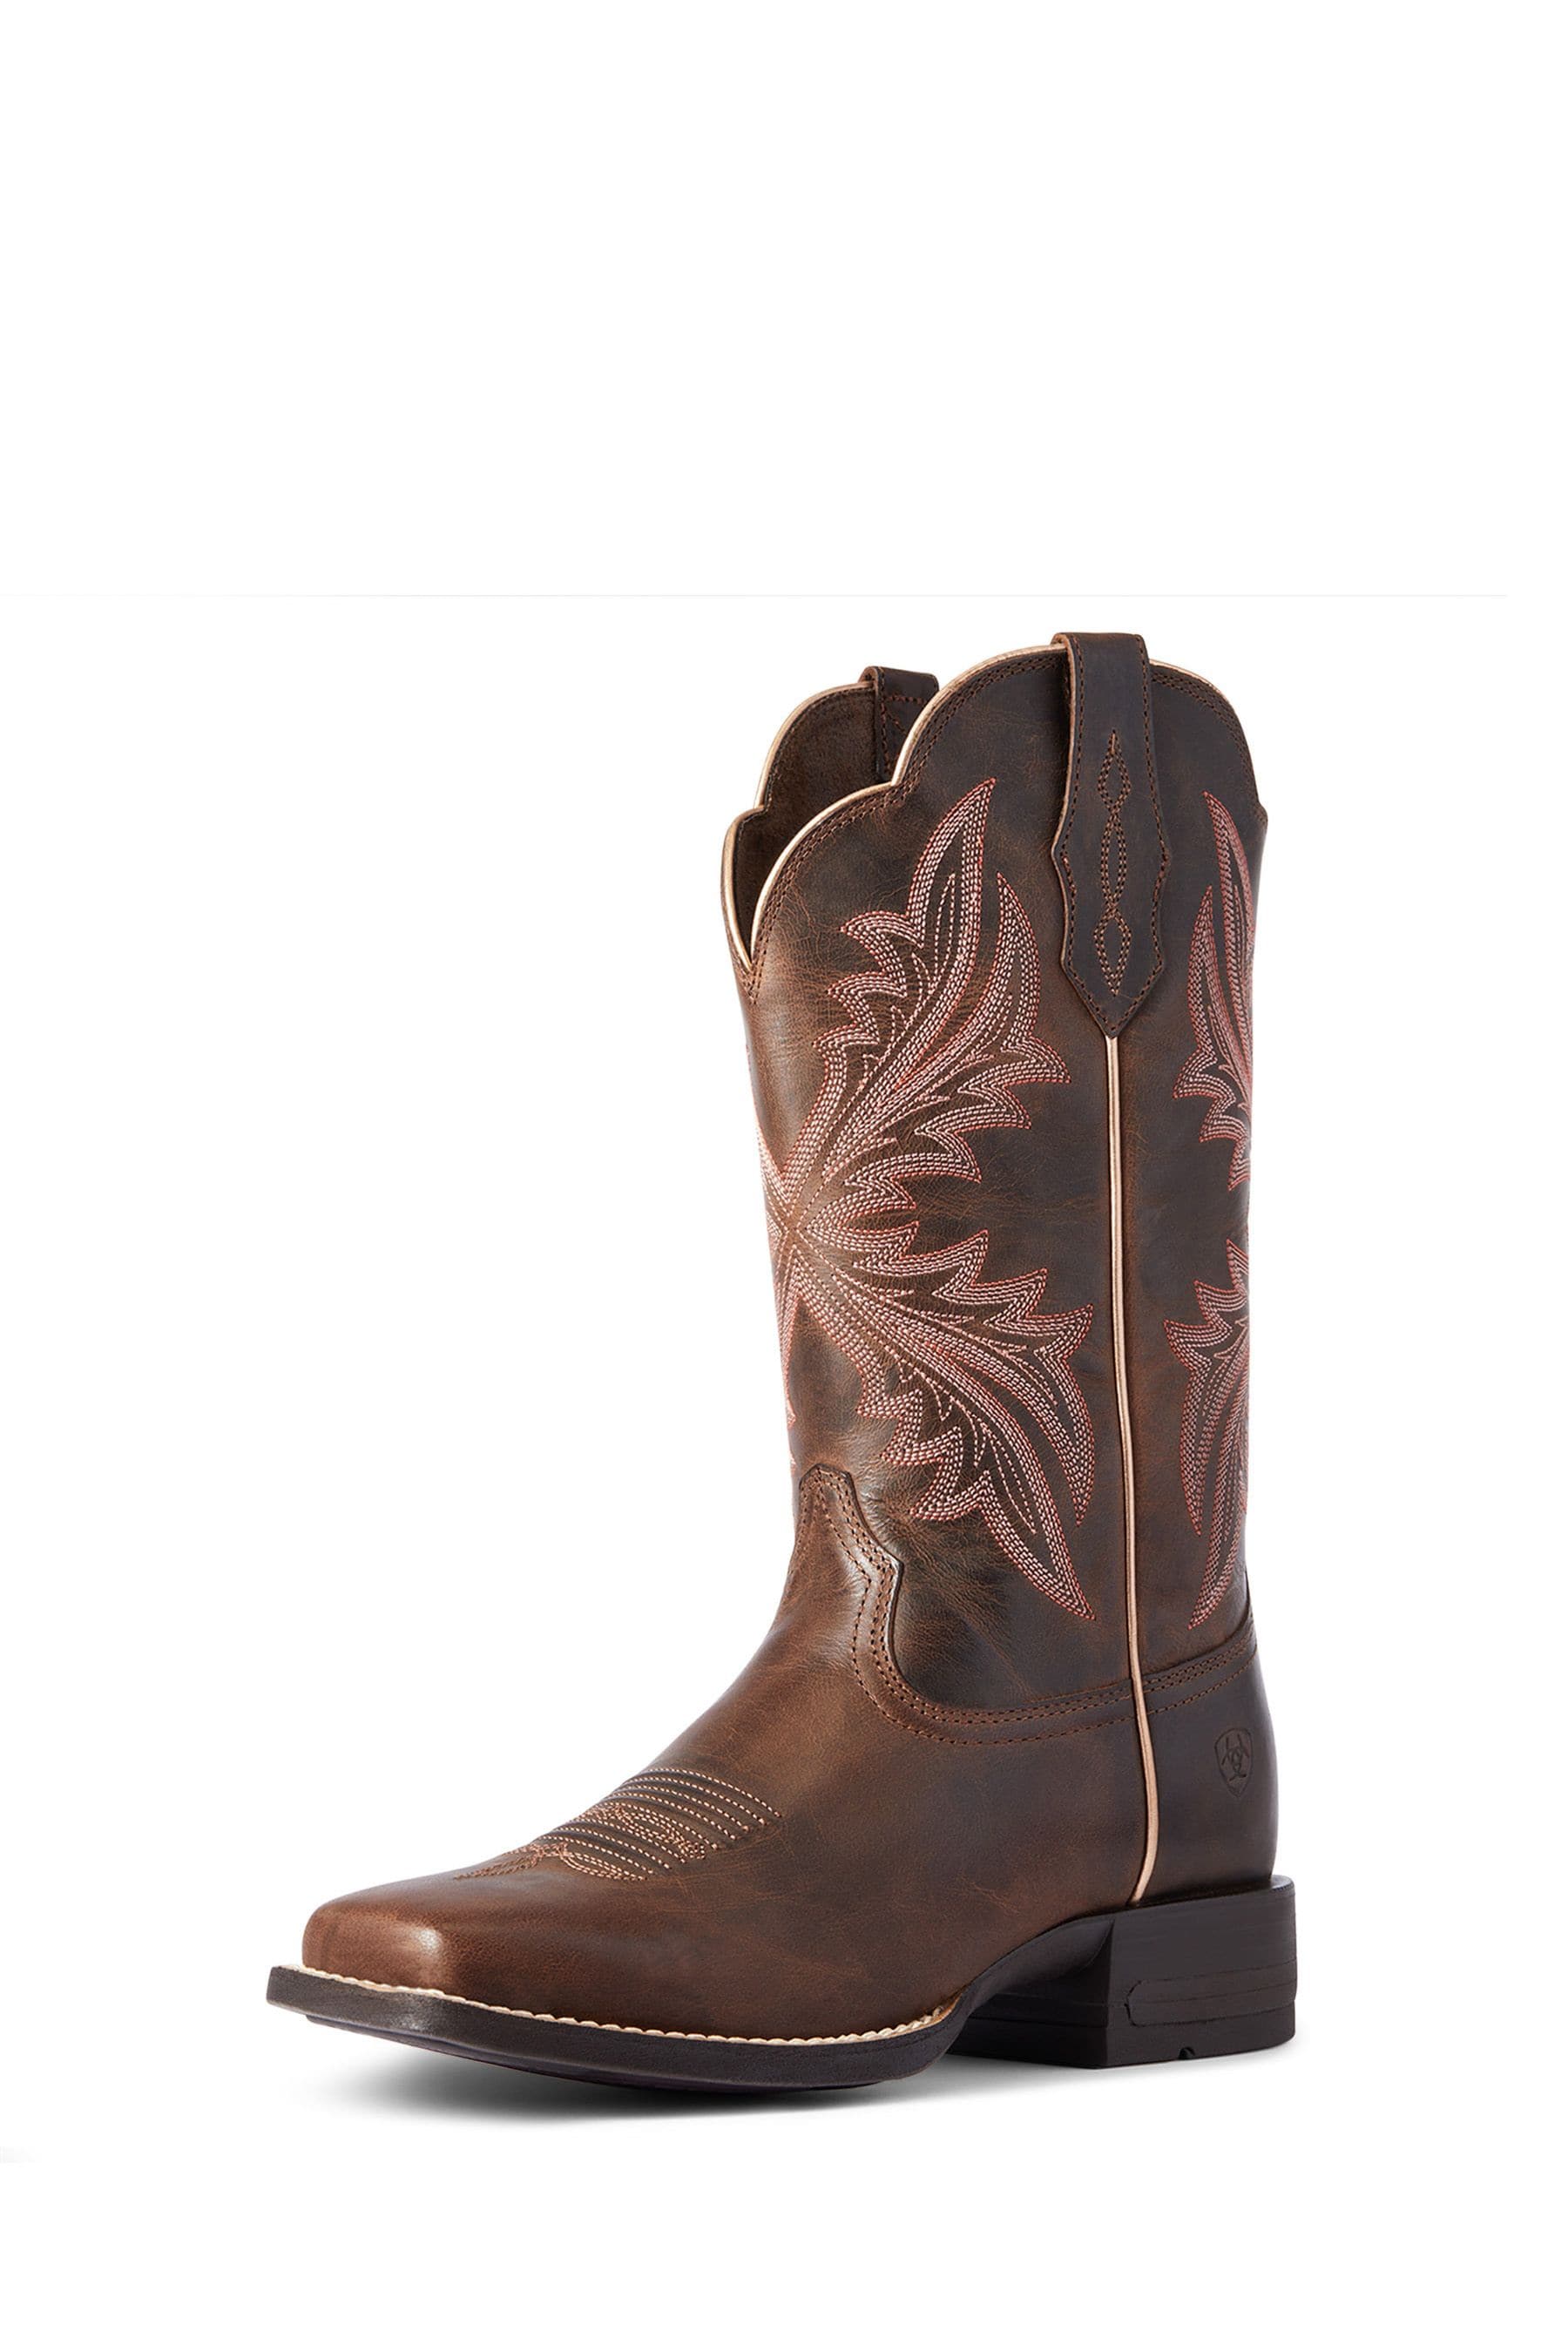 Buy Ariat West Bound Western Brown Boots from the Next UK online shop